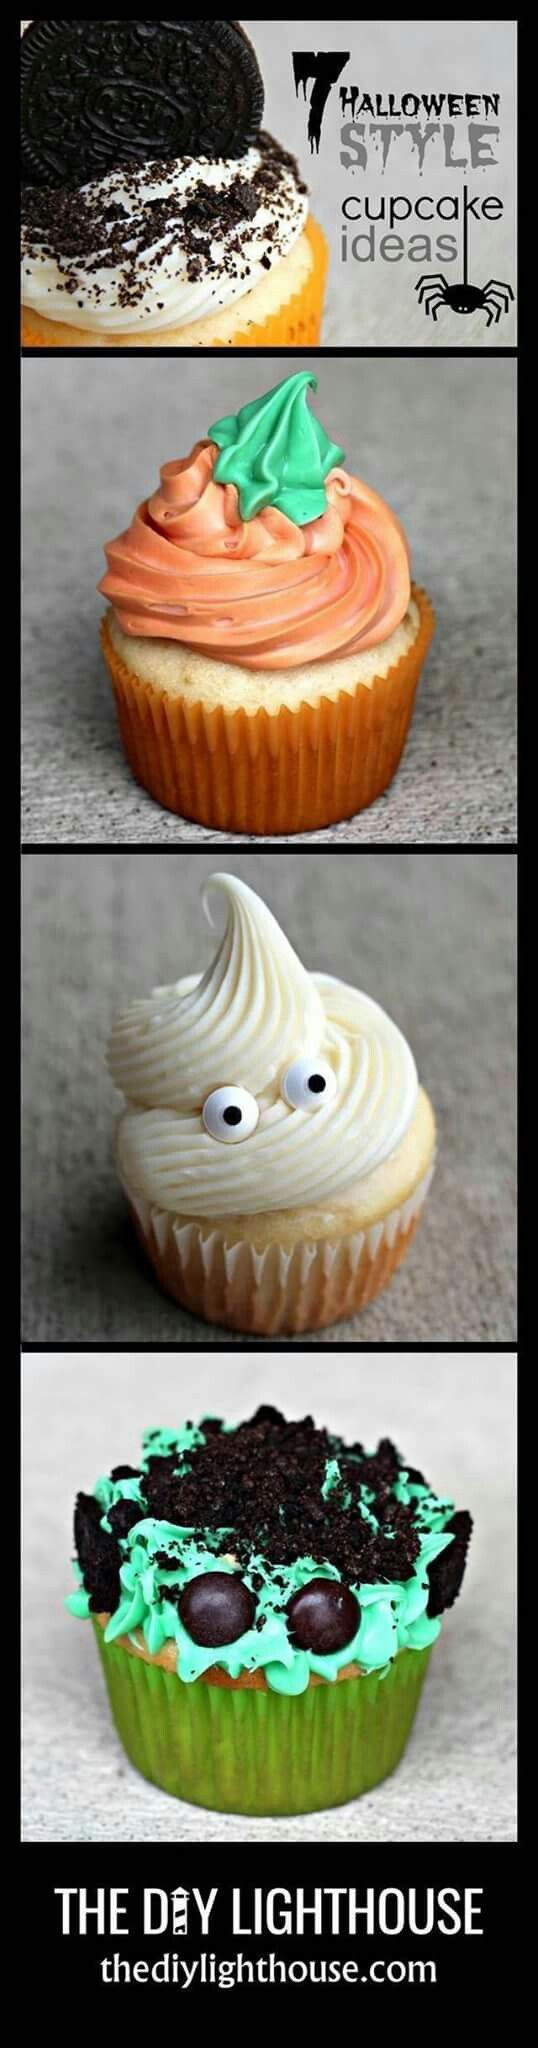 Cool Halloween Cup Cakes
 Best 20 Cool cupcakes ideas on Pinterest